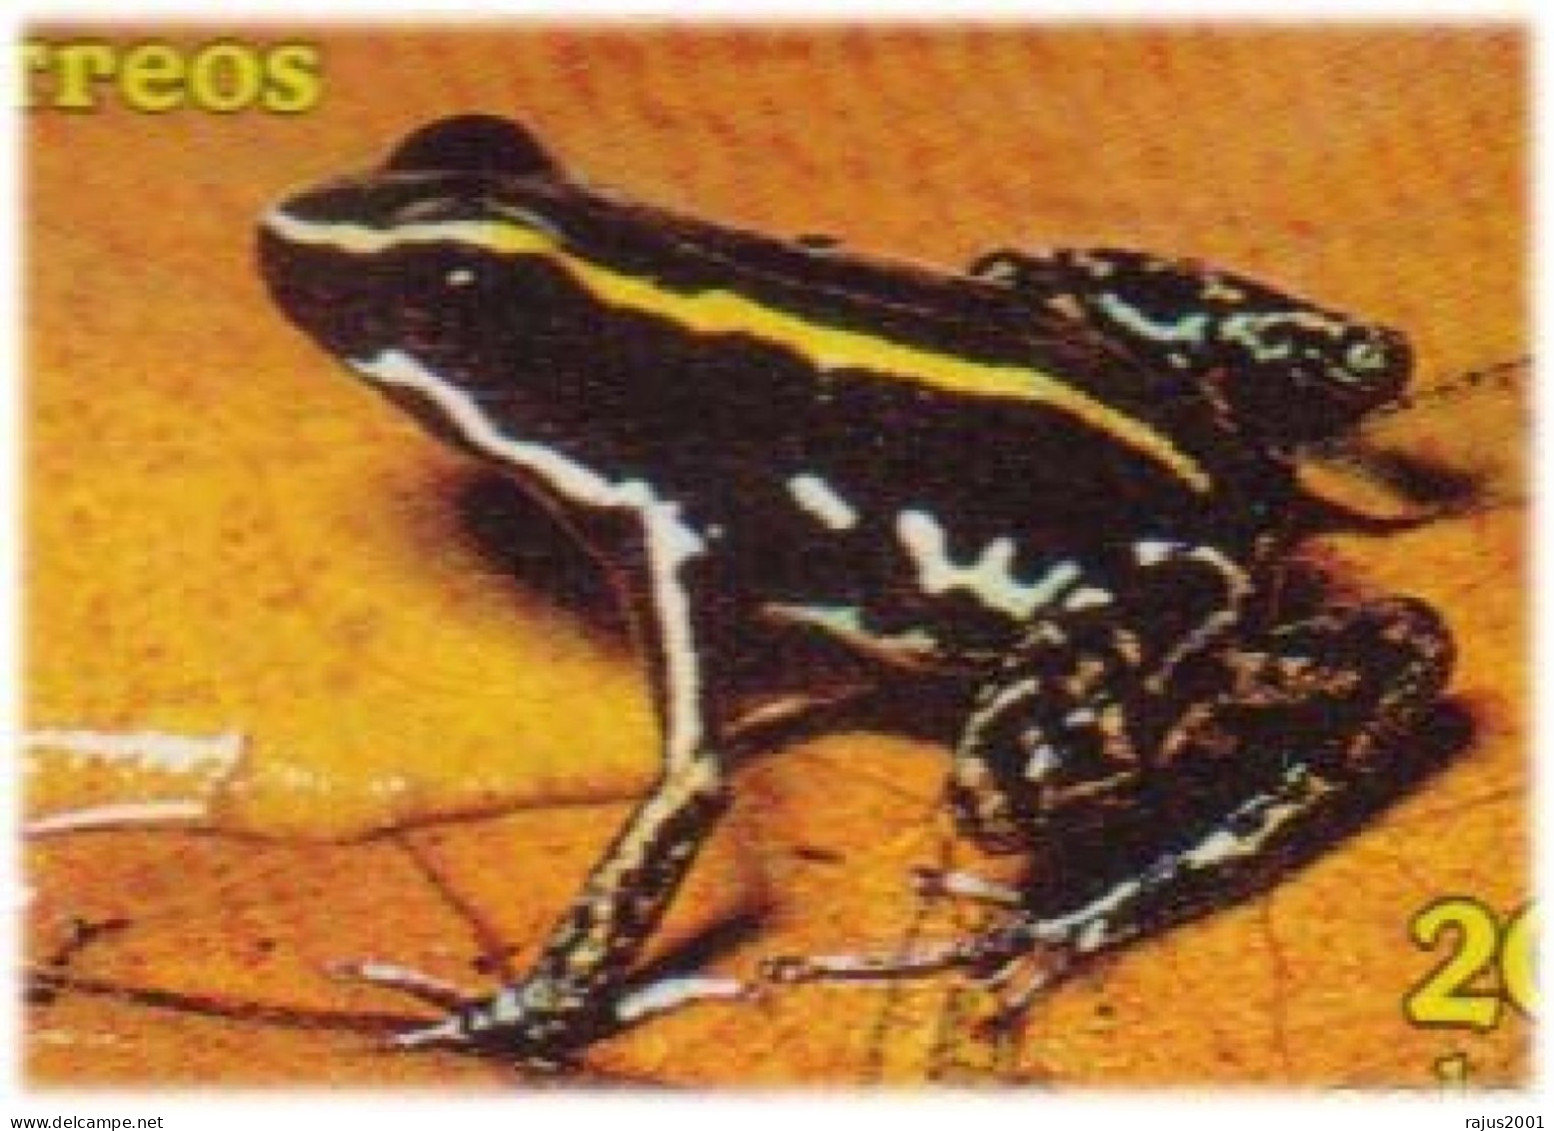 Phyllobates Lugubris Lovely Poison Frog, Hourglass Tree Frog, Blue Jeans Strawberry Poison Frog, Harmful Animal FDC - Grenouilles